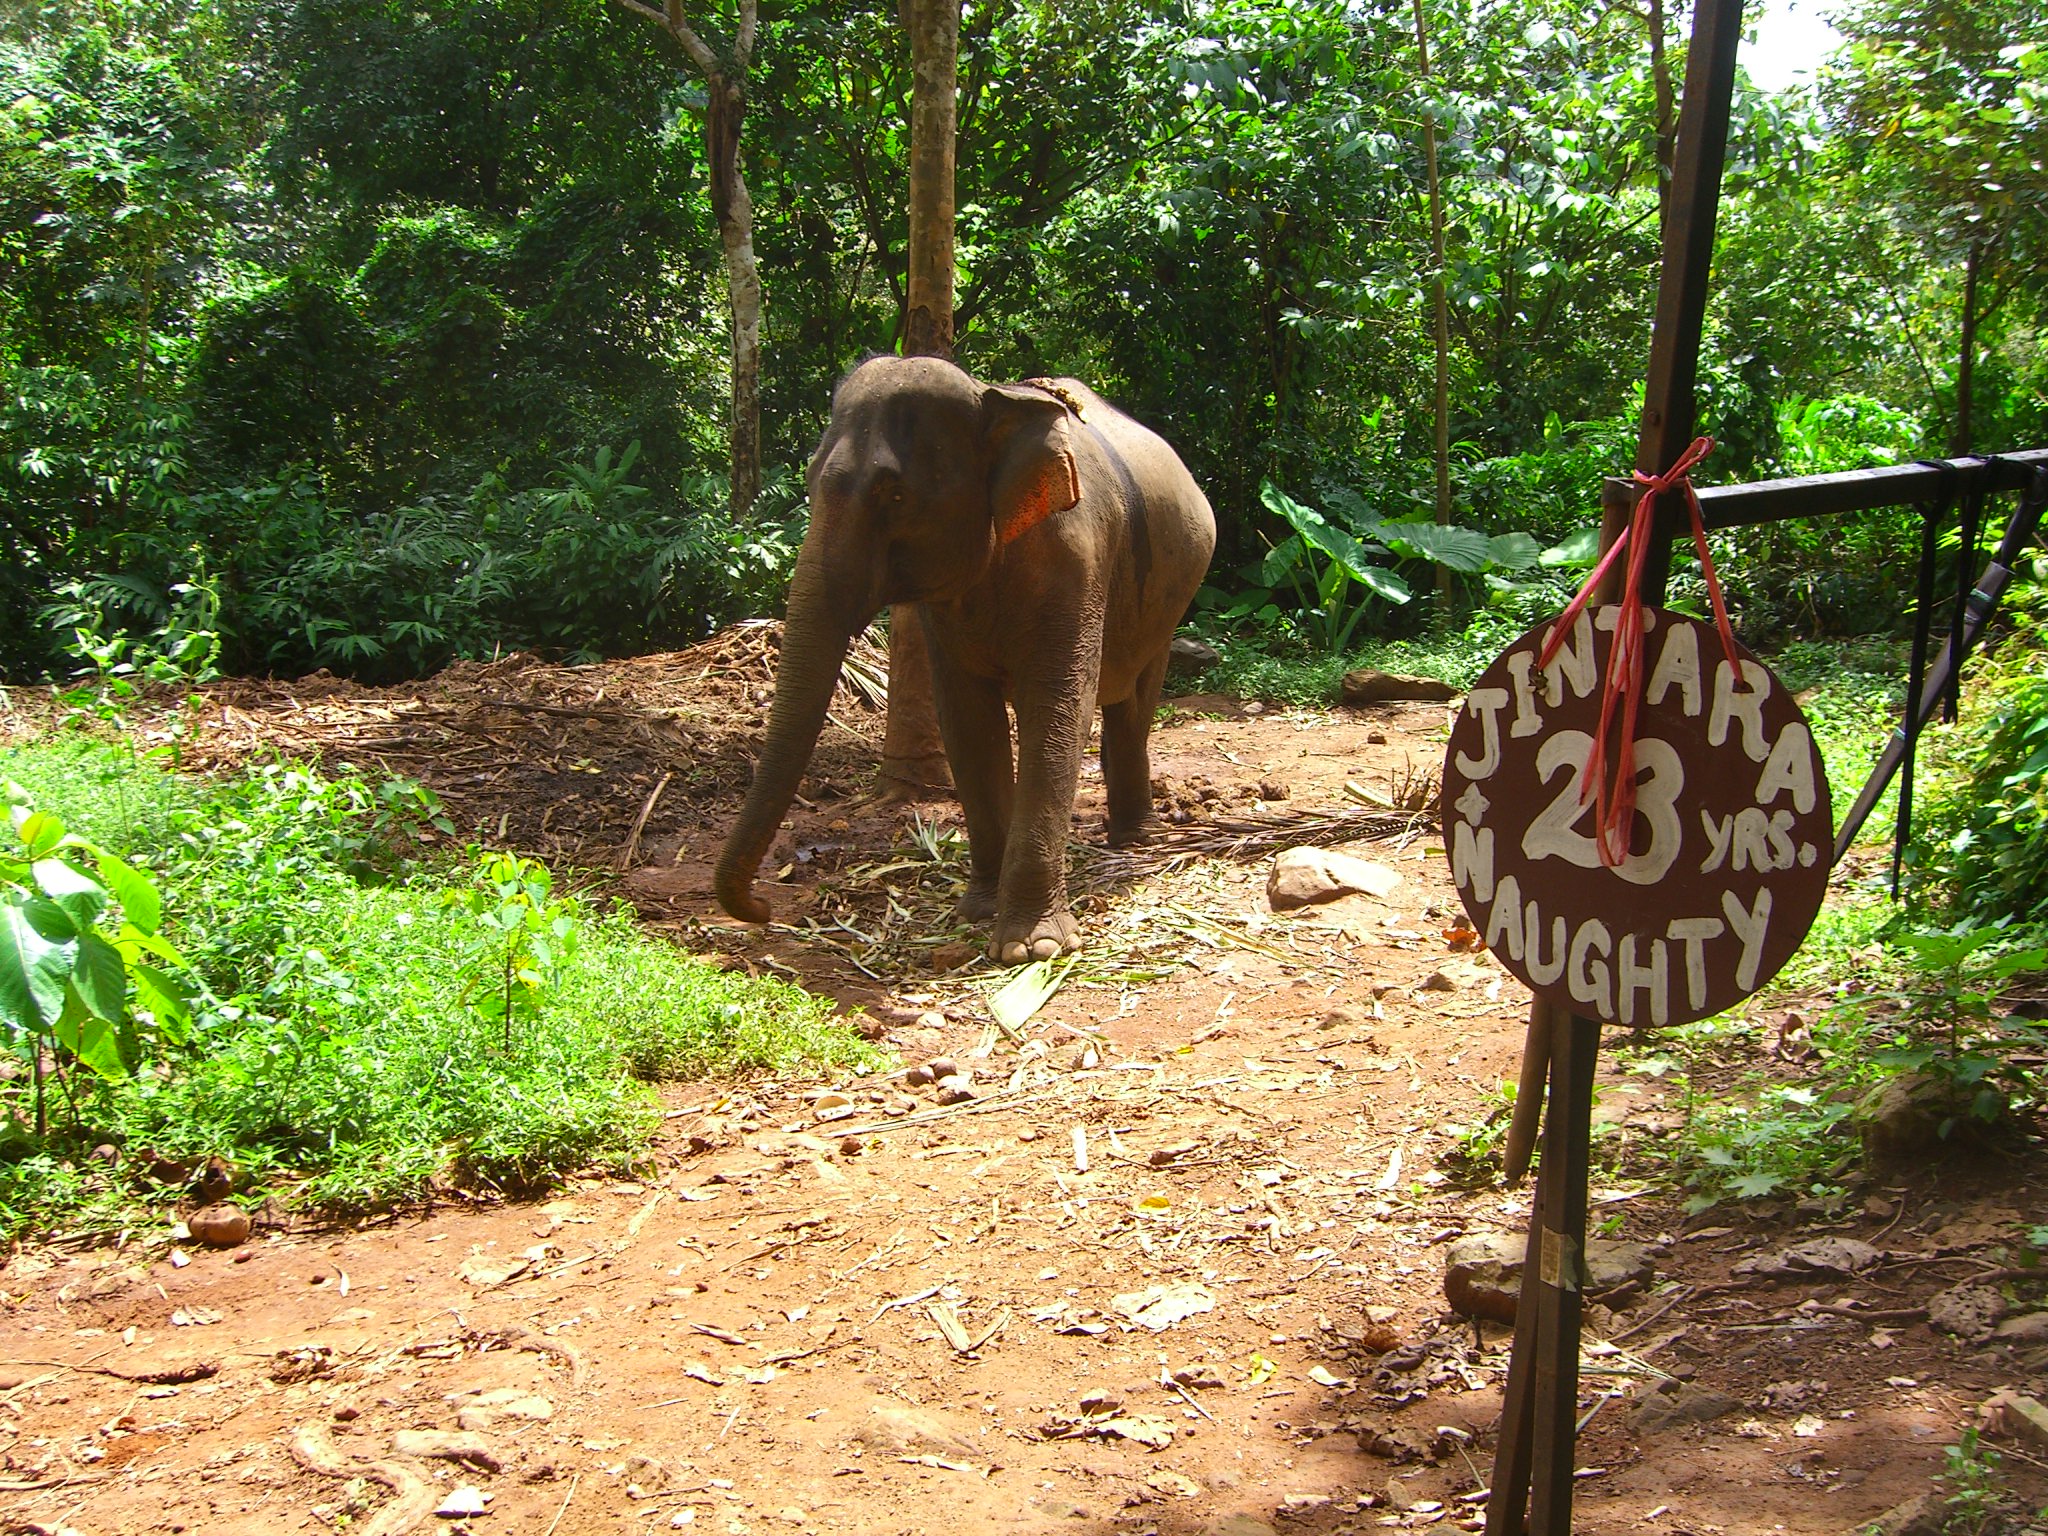 an elephant on dirt road with trees and shrubs in background